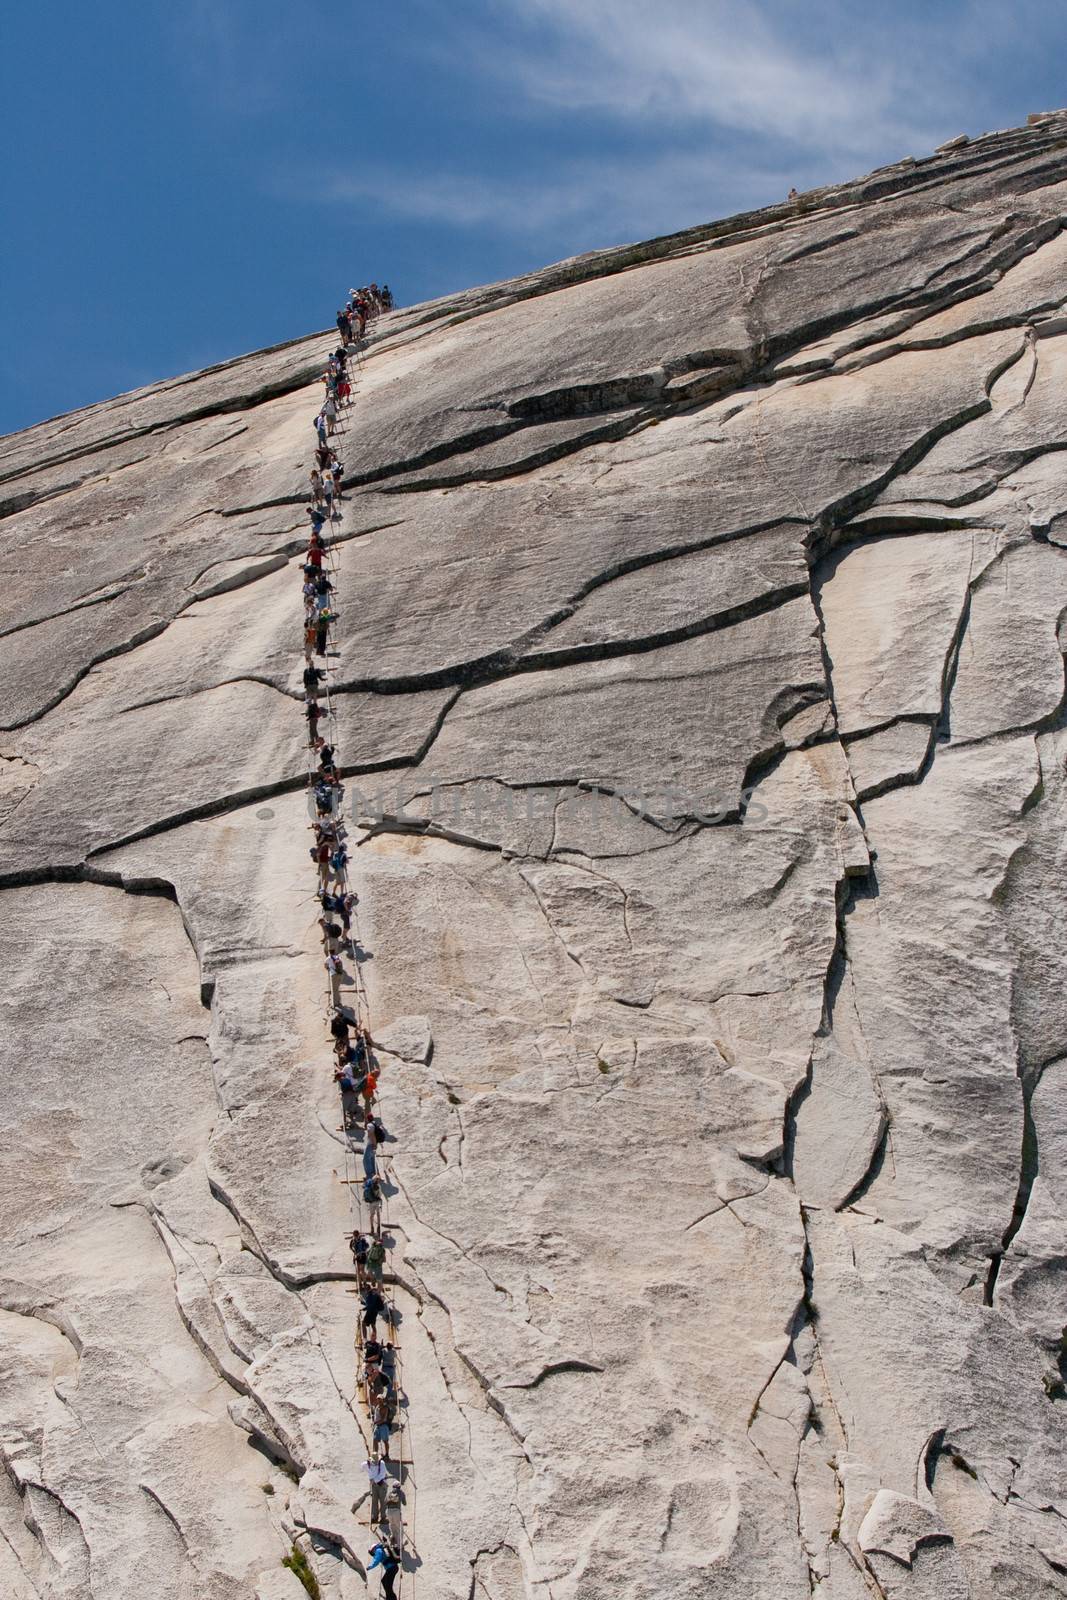 The Cable Ladder going up the Half Dome in Yosemite National Park in California.